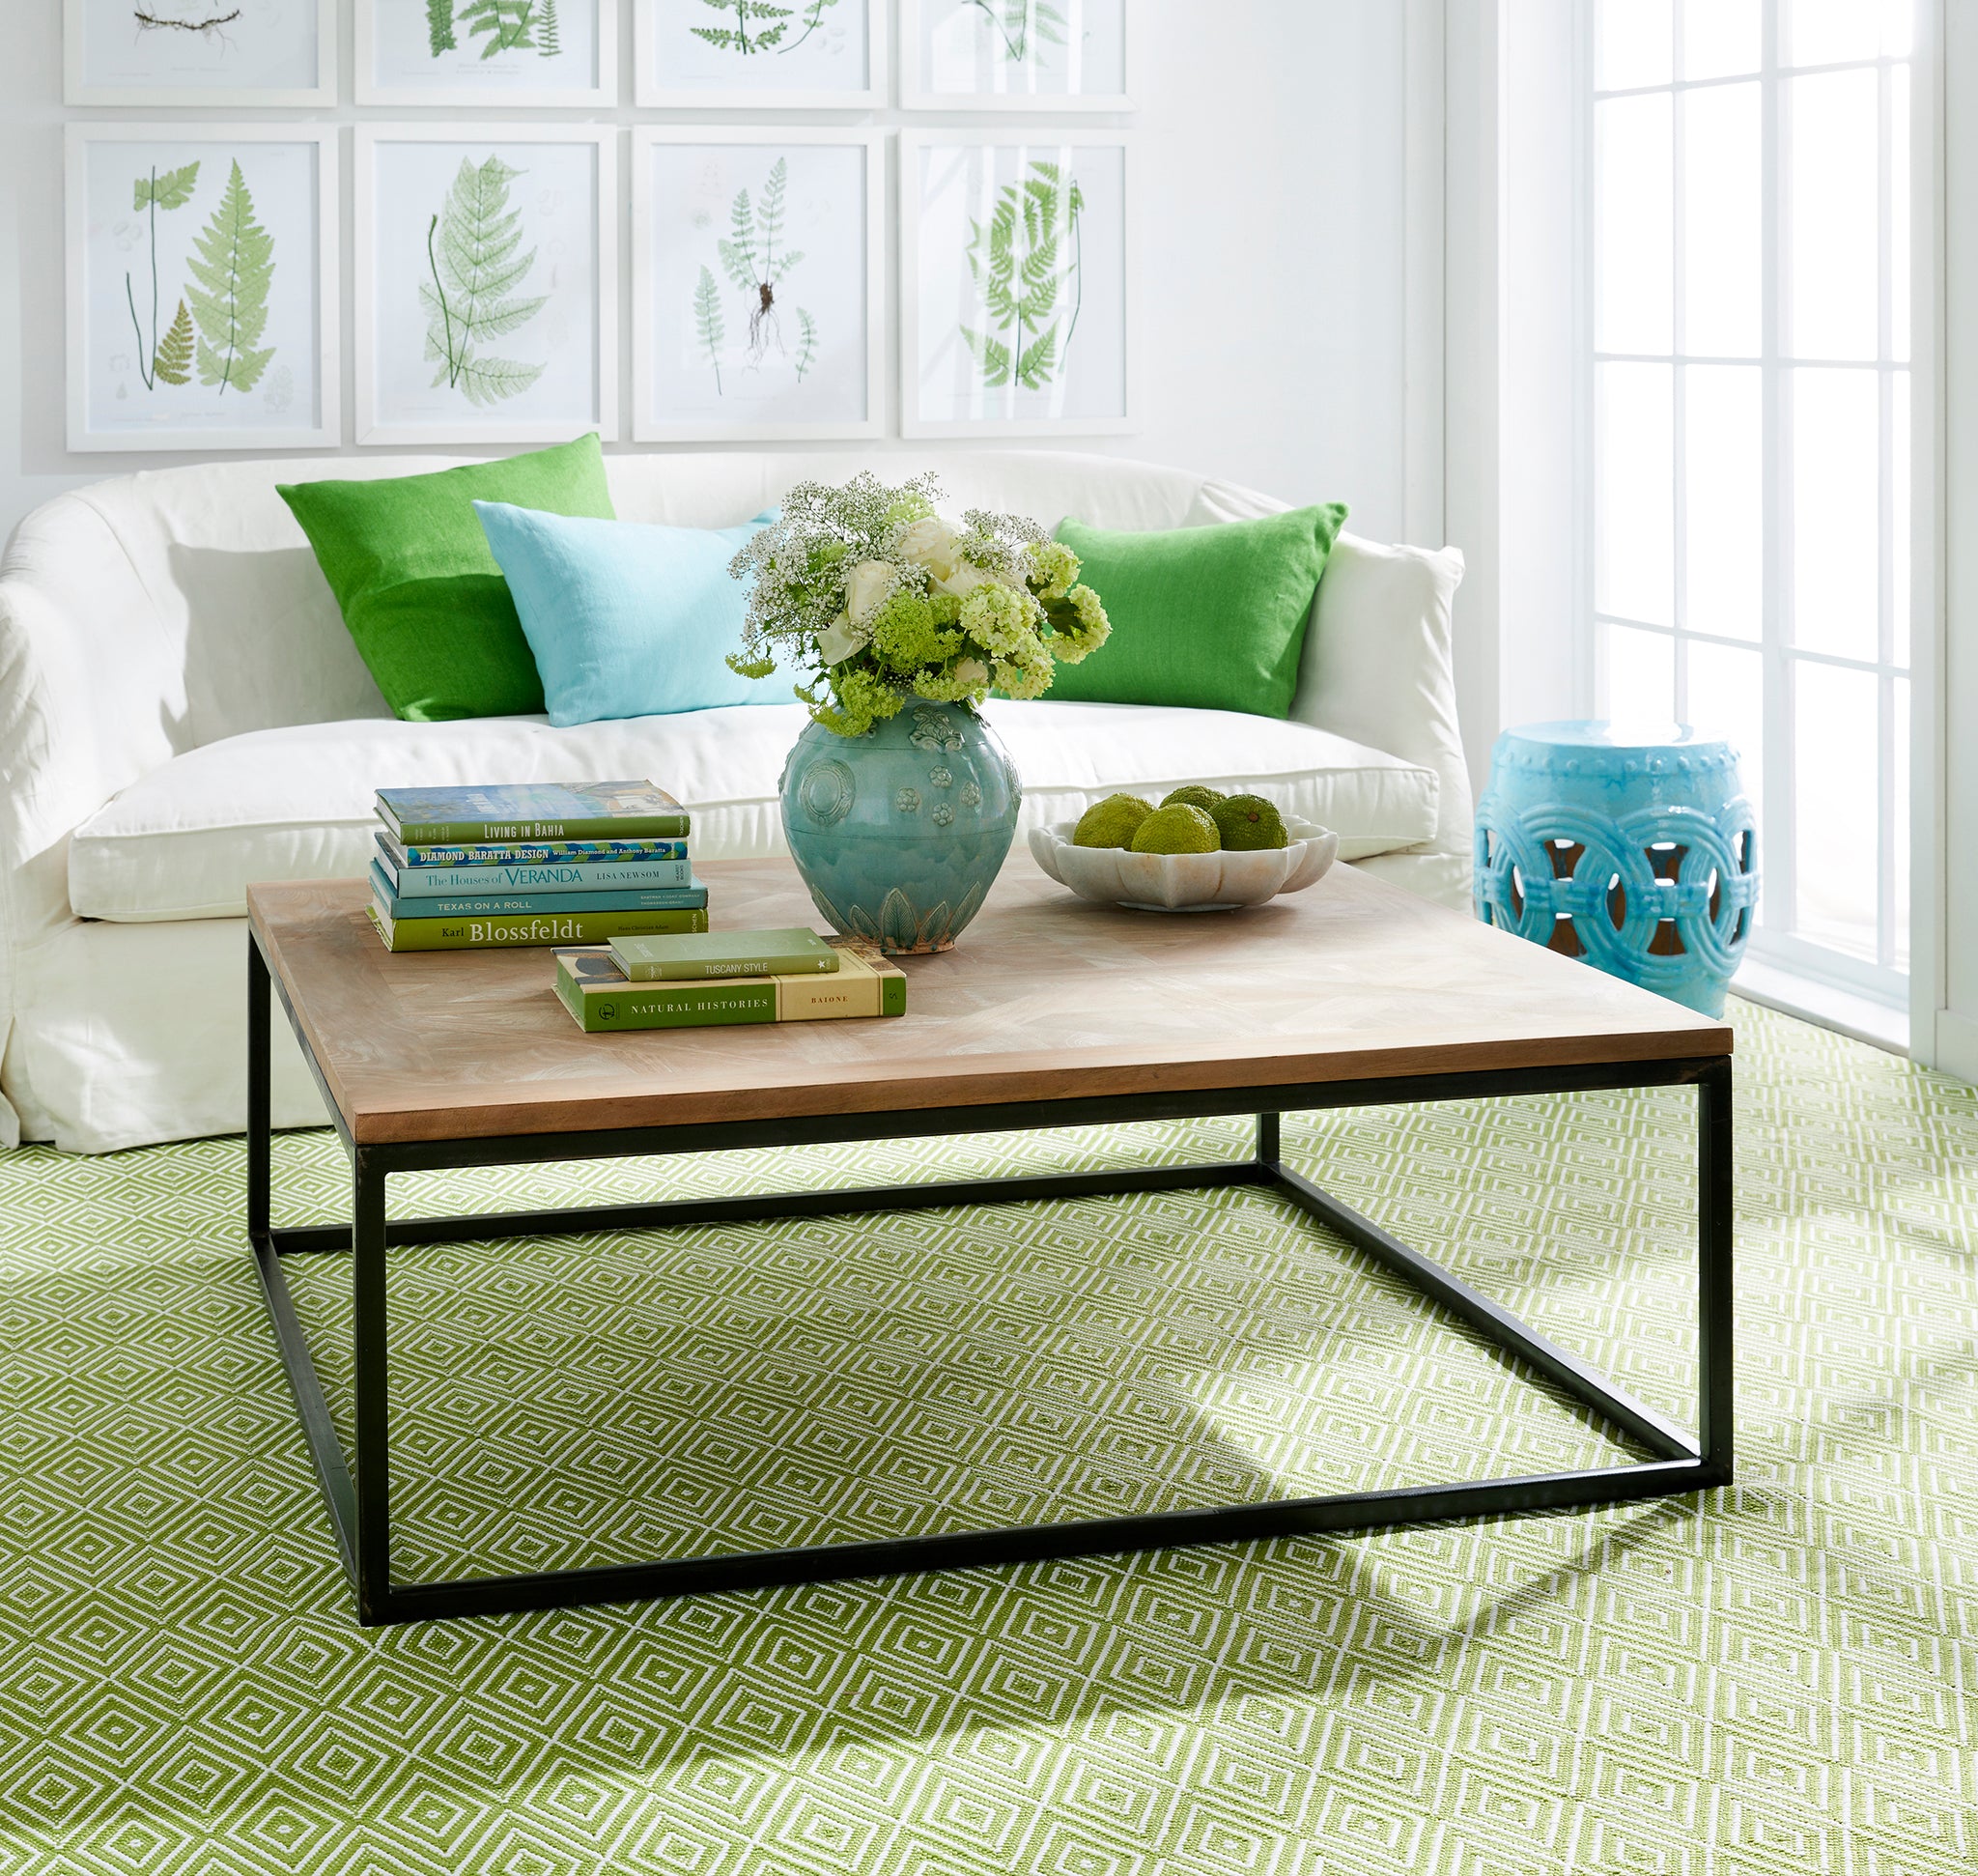 Original Parquet Coffee Table in a Living Room Setting: Standing on a Green Carpet with a White Couch in the Background